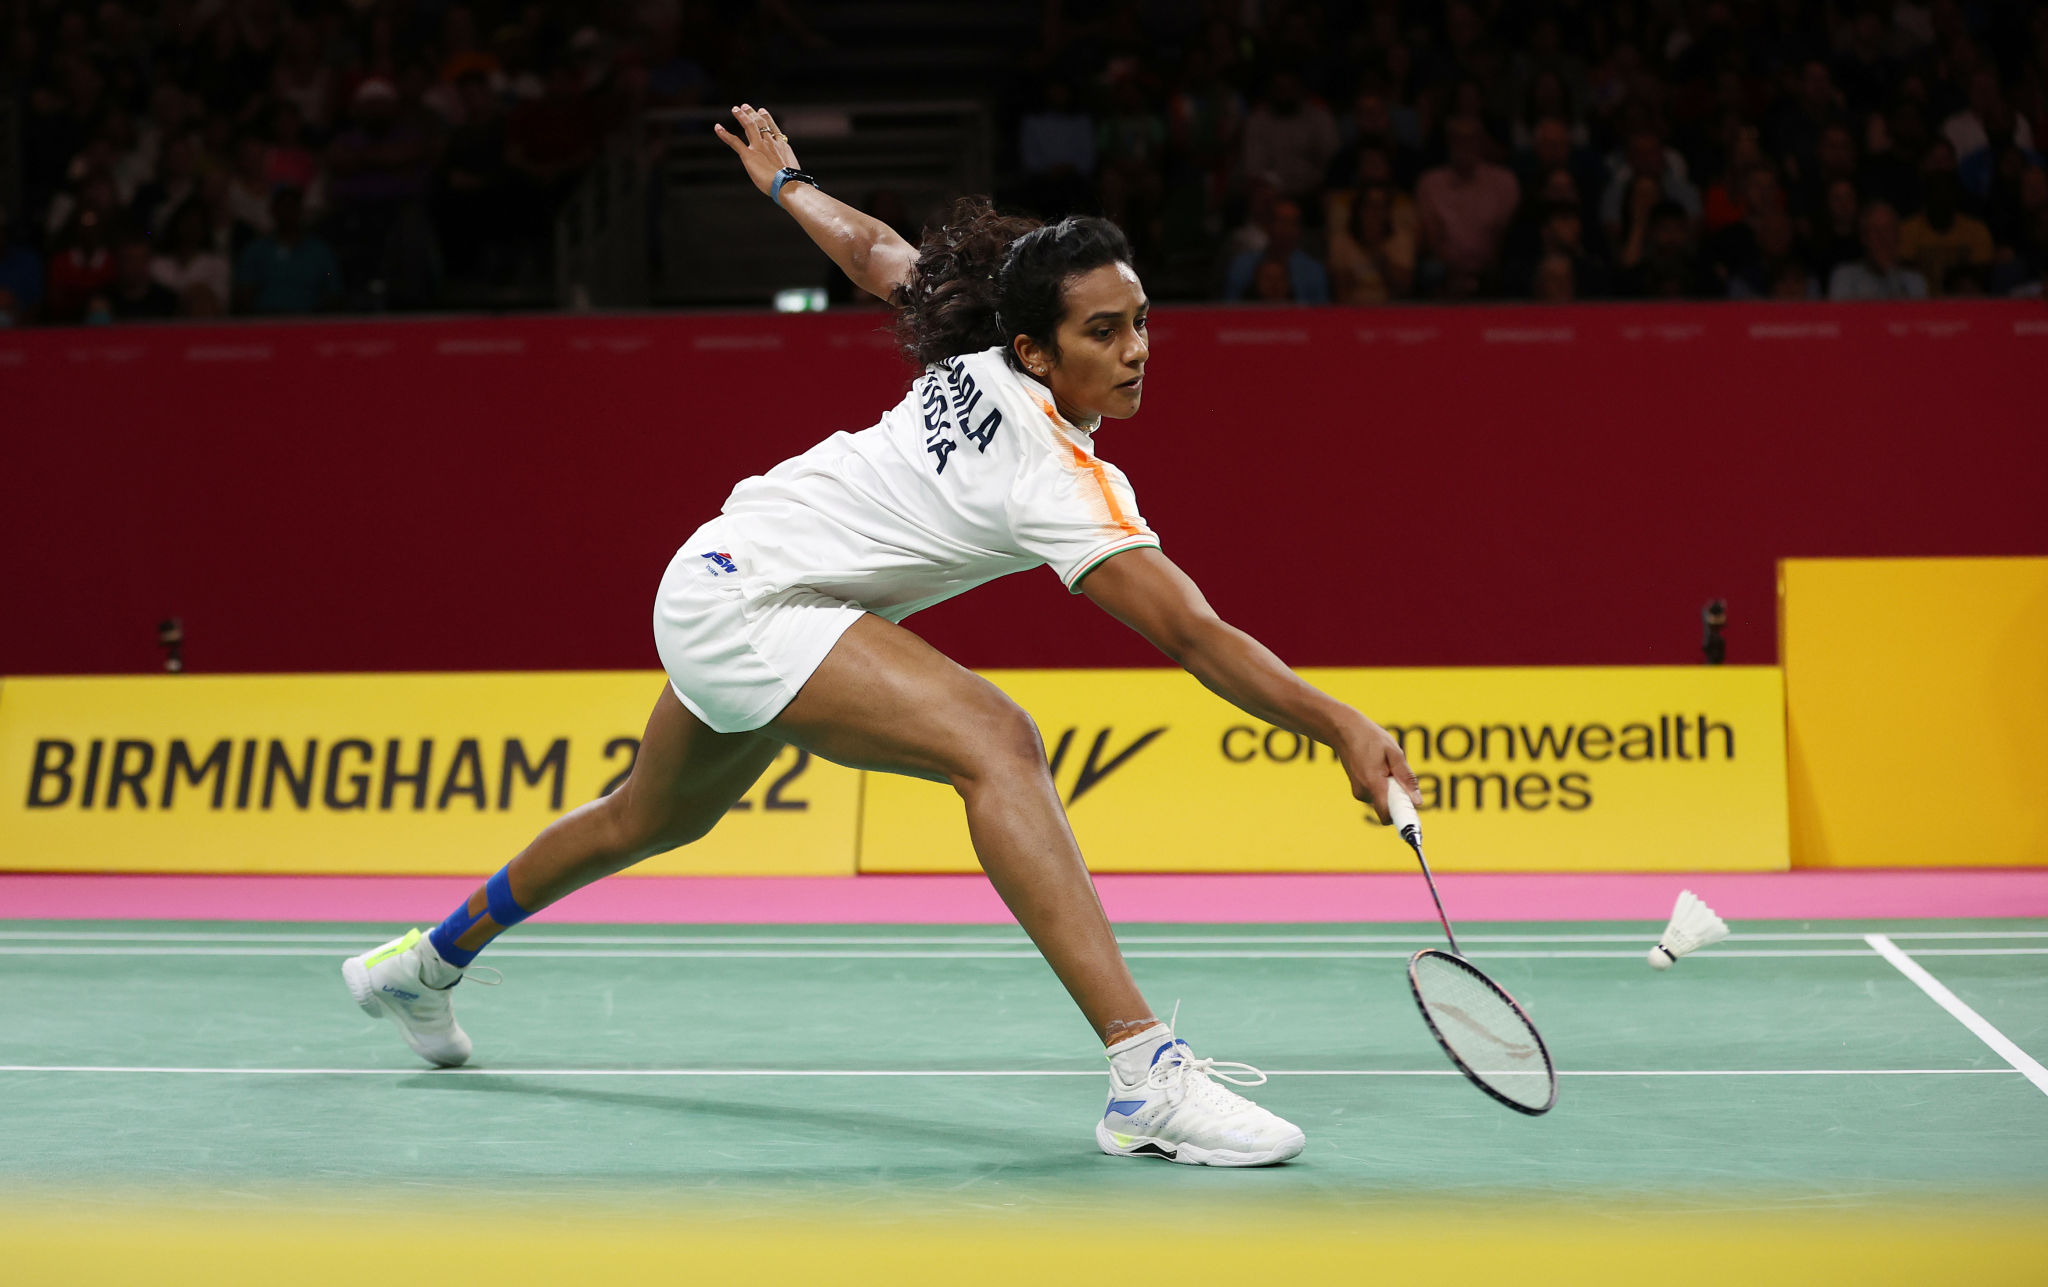 India Open Badminton LIVE: All you want to know about India Open Badminton 2023 Draws, Schedule, Prize Money, Indian players in Action & LIVE Streaming details: Follow LIVE updates